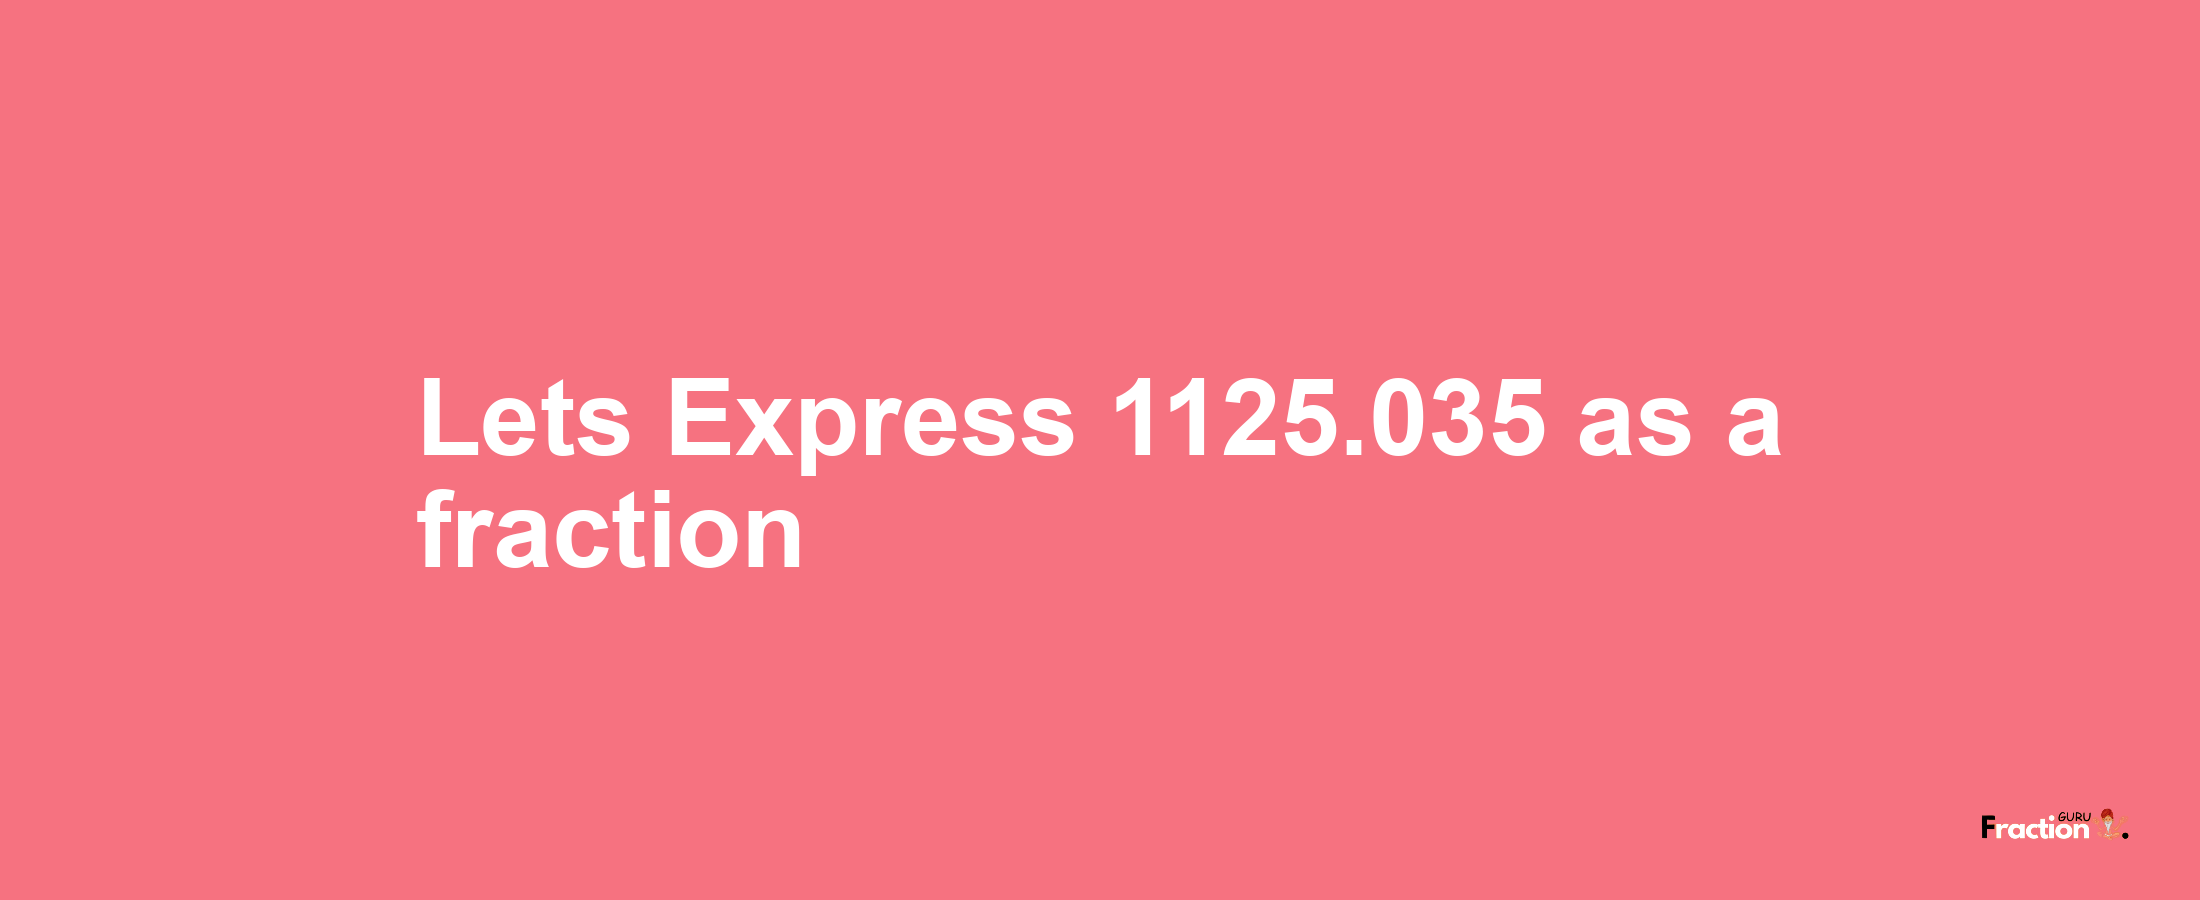 Lets Express 1125.035 as afraction